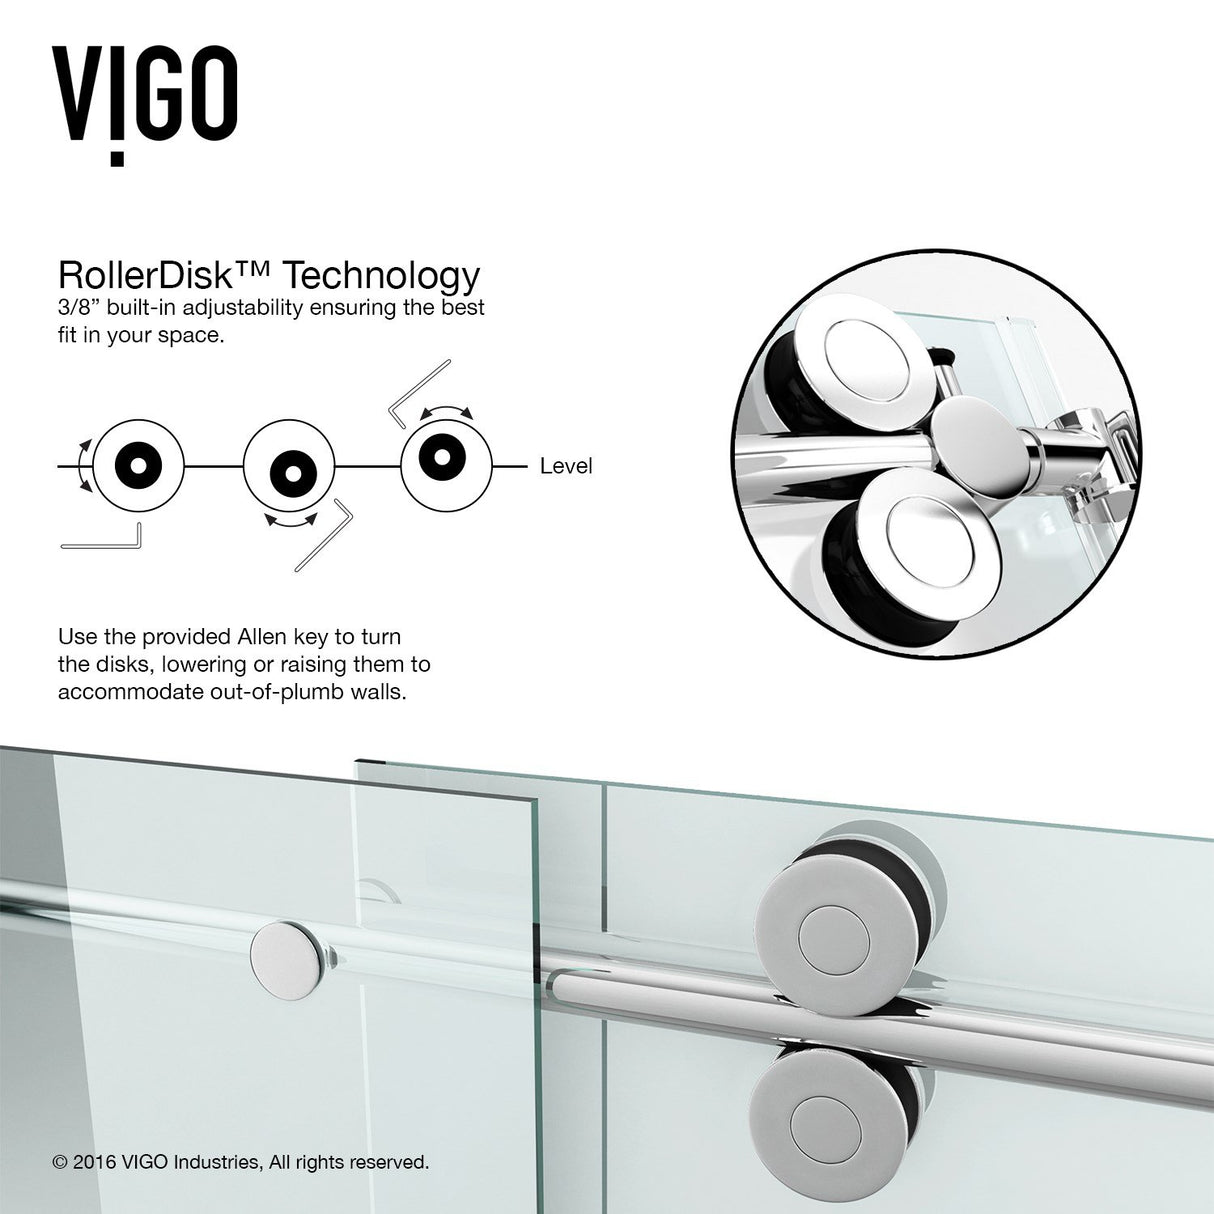 VIGO Adjustable 68 - 72 in. W x 74 in. H Frameless Sliding Rectangle Shower Door with Clear Tempered Glass and Stainless Steel Hardware in Chrome Finish with Reversible Handle - VG6041CHCL7274